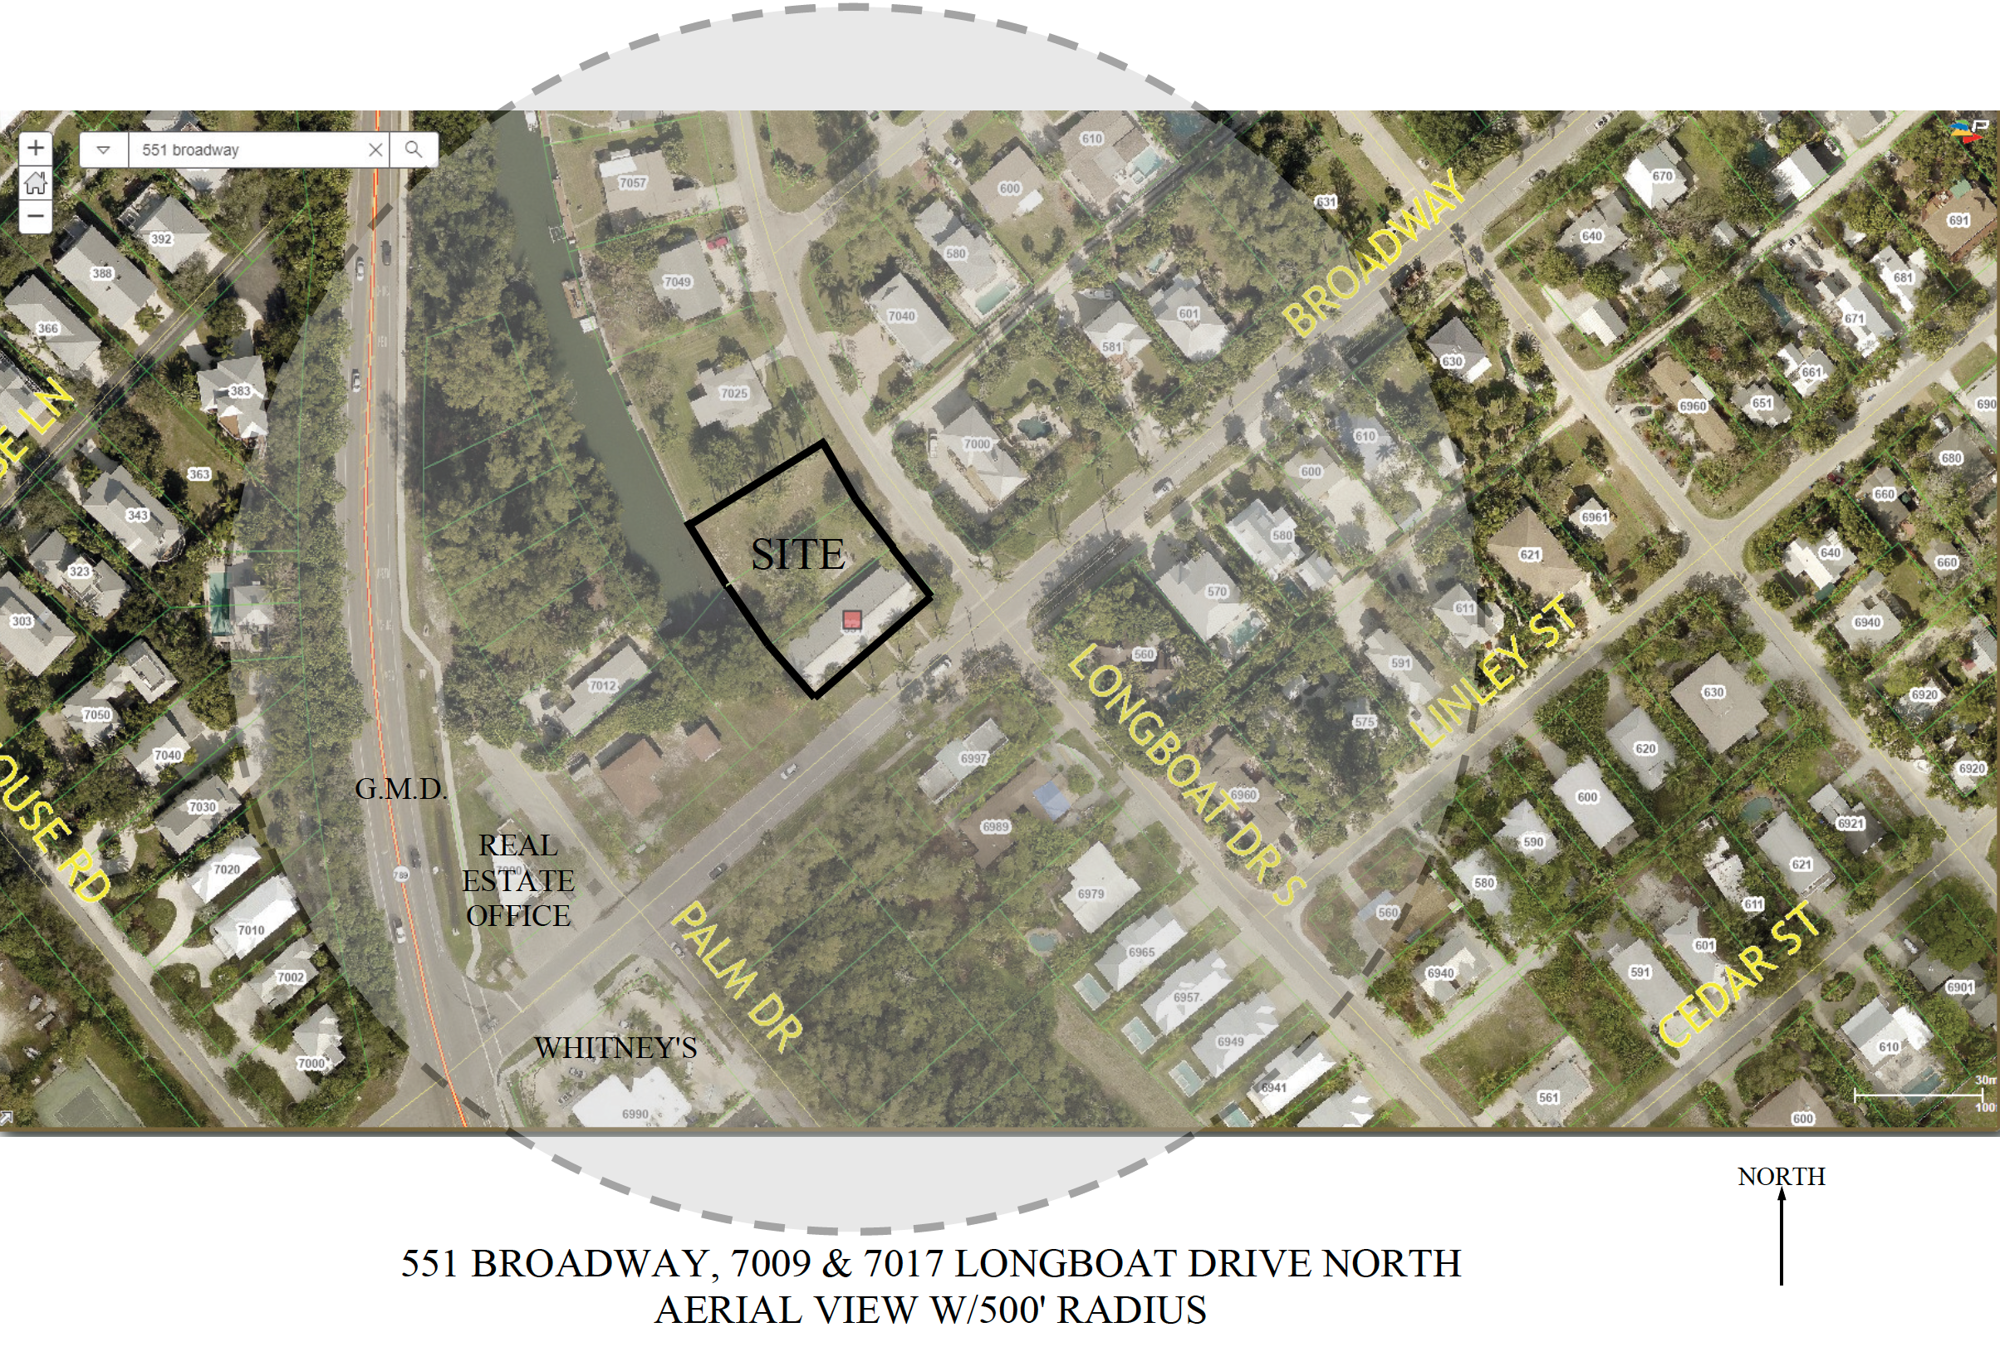 A map shows the denied proposal to build four homes at 551 Broadway Street and 7009 and 7017 Longboat Drive North. The town of Longboat Key provided the map.